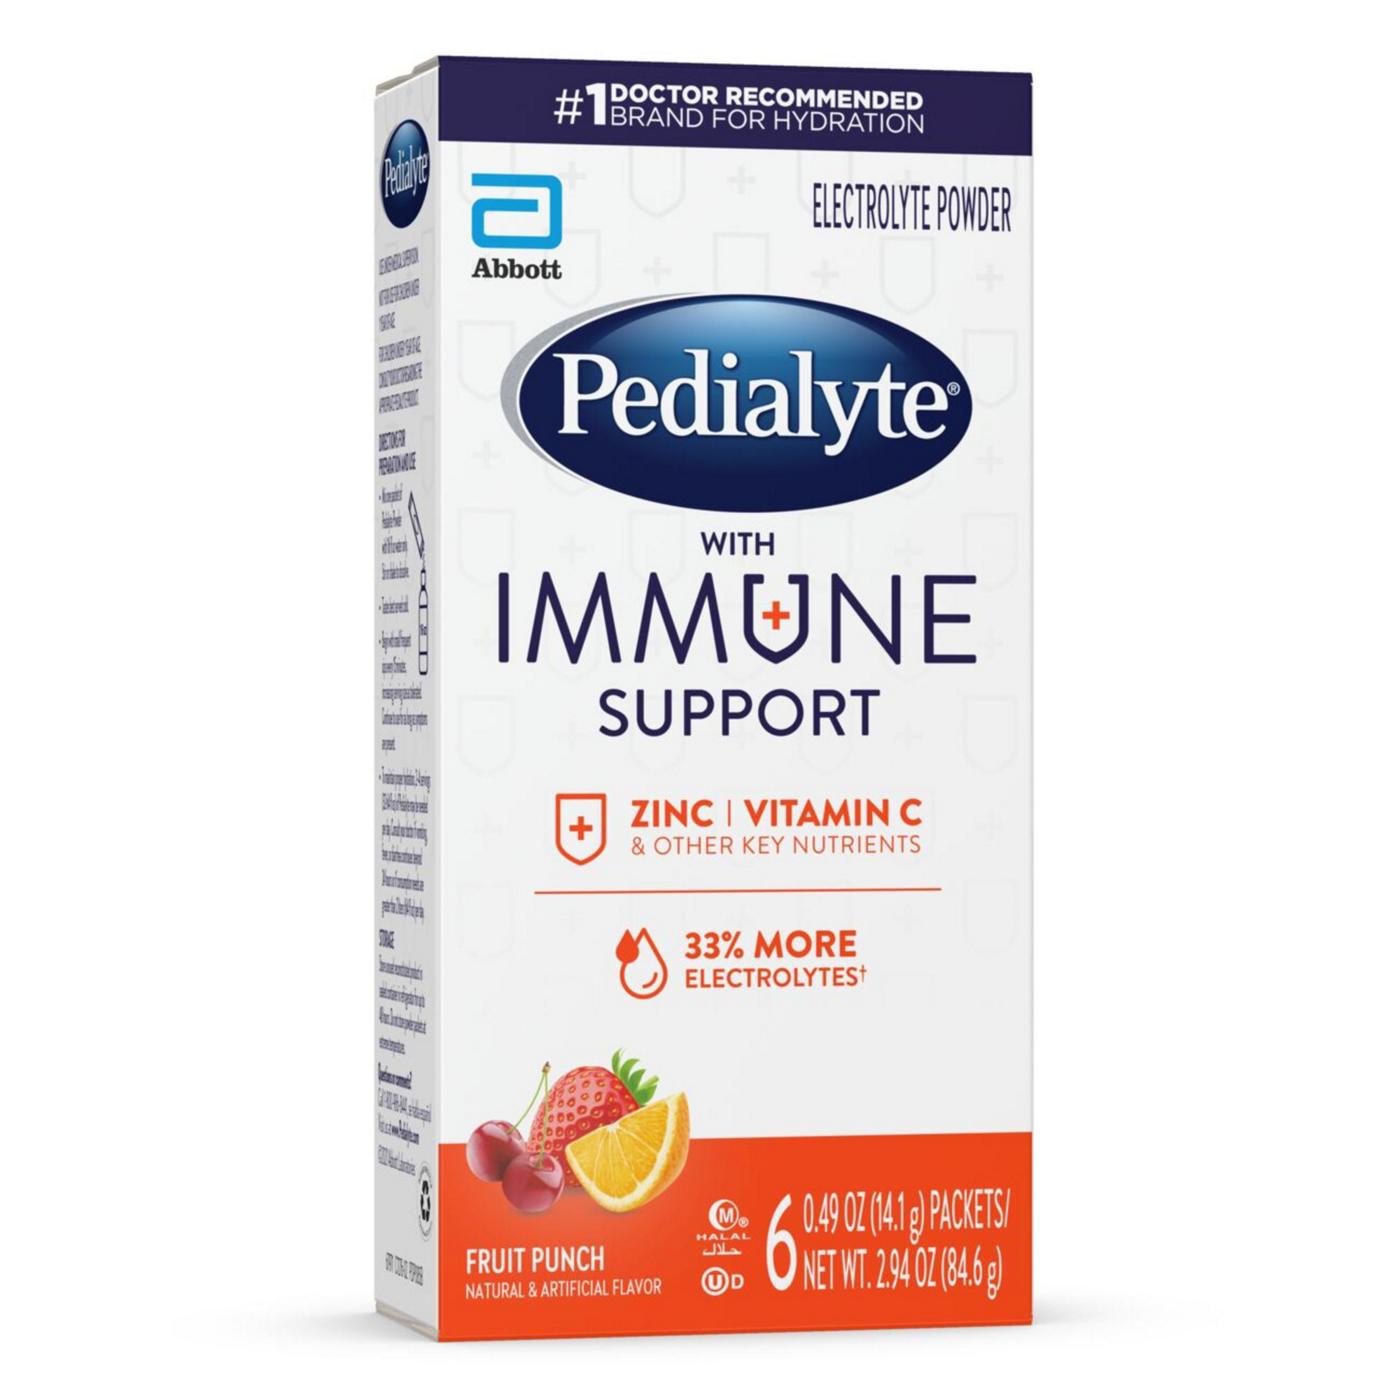 Pedialyte with Immune Support Electrolyte Powder Packs - Fruit Punch; image 5 of 7